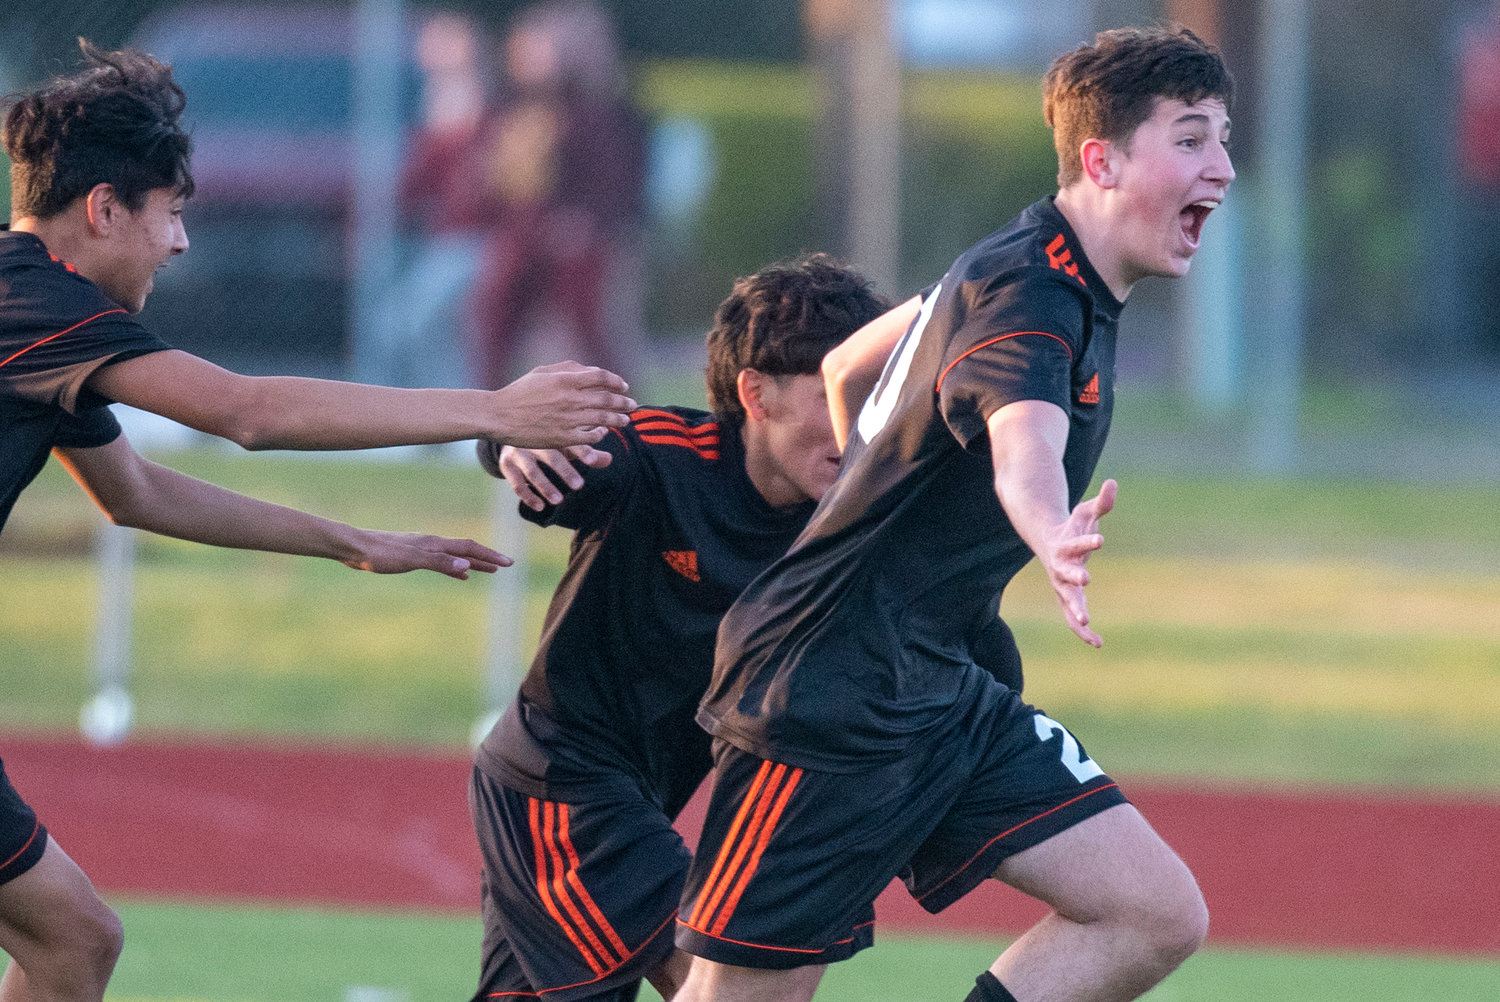 Centralia's Alan Cox, right, reacts after scoring the first goal of the game in the 10th minute against W.F. West on April 22.